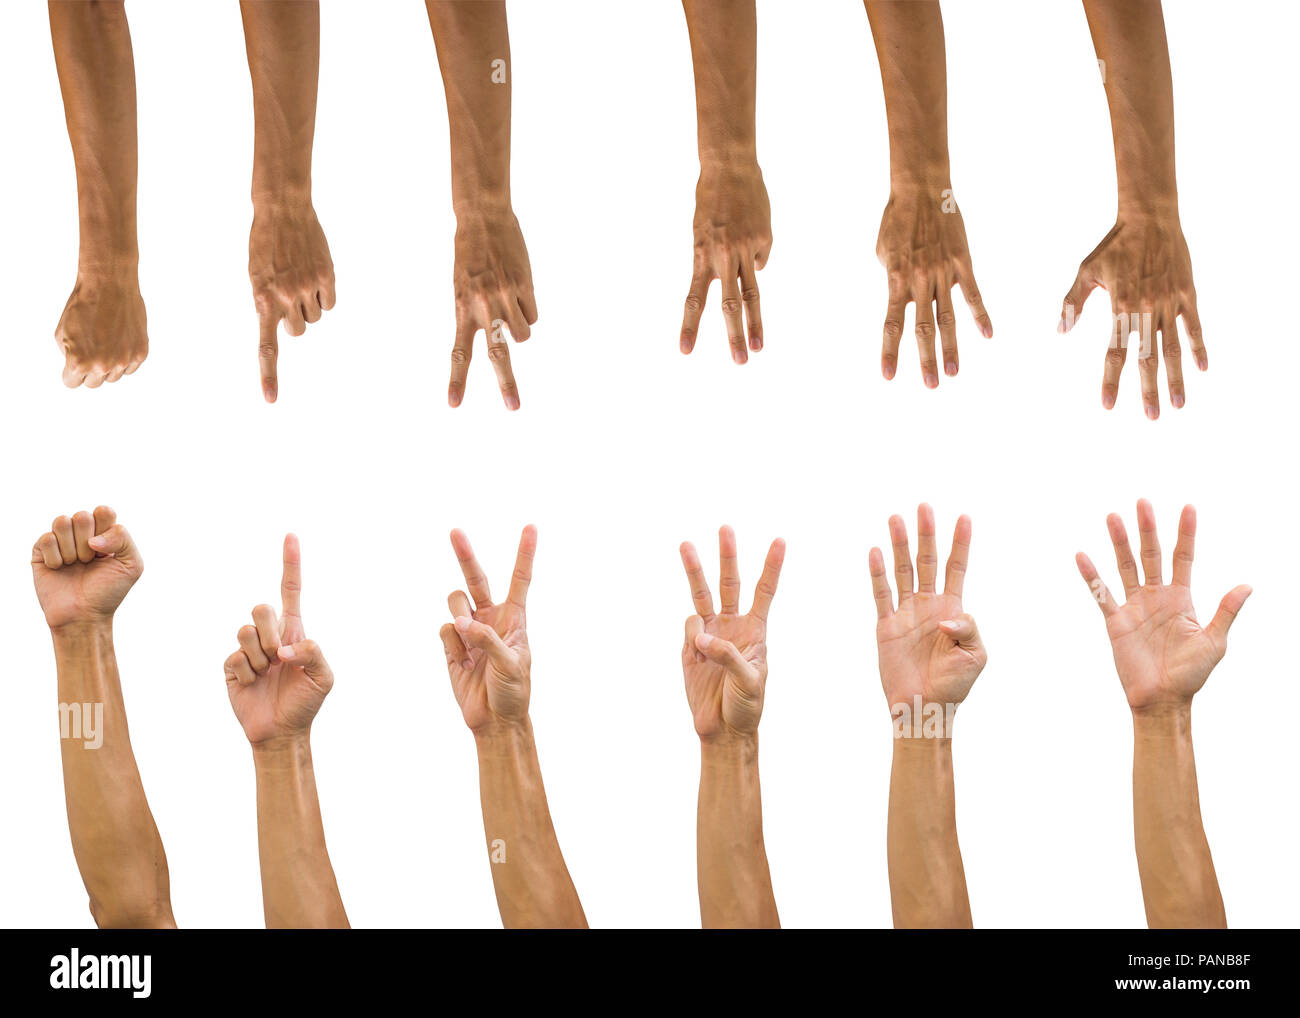 Set of hand gesture isolated on white background with clipping path. Collection of multiple front and back hands count numbers. upside down hand. Stock Photo